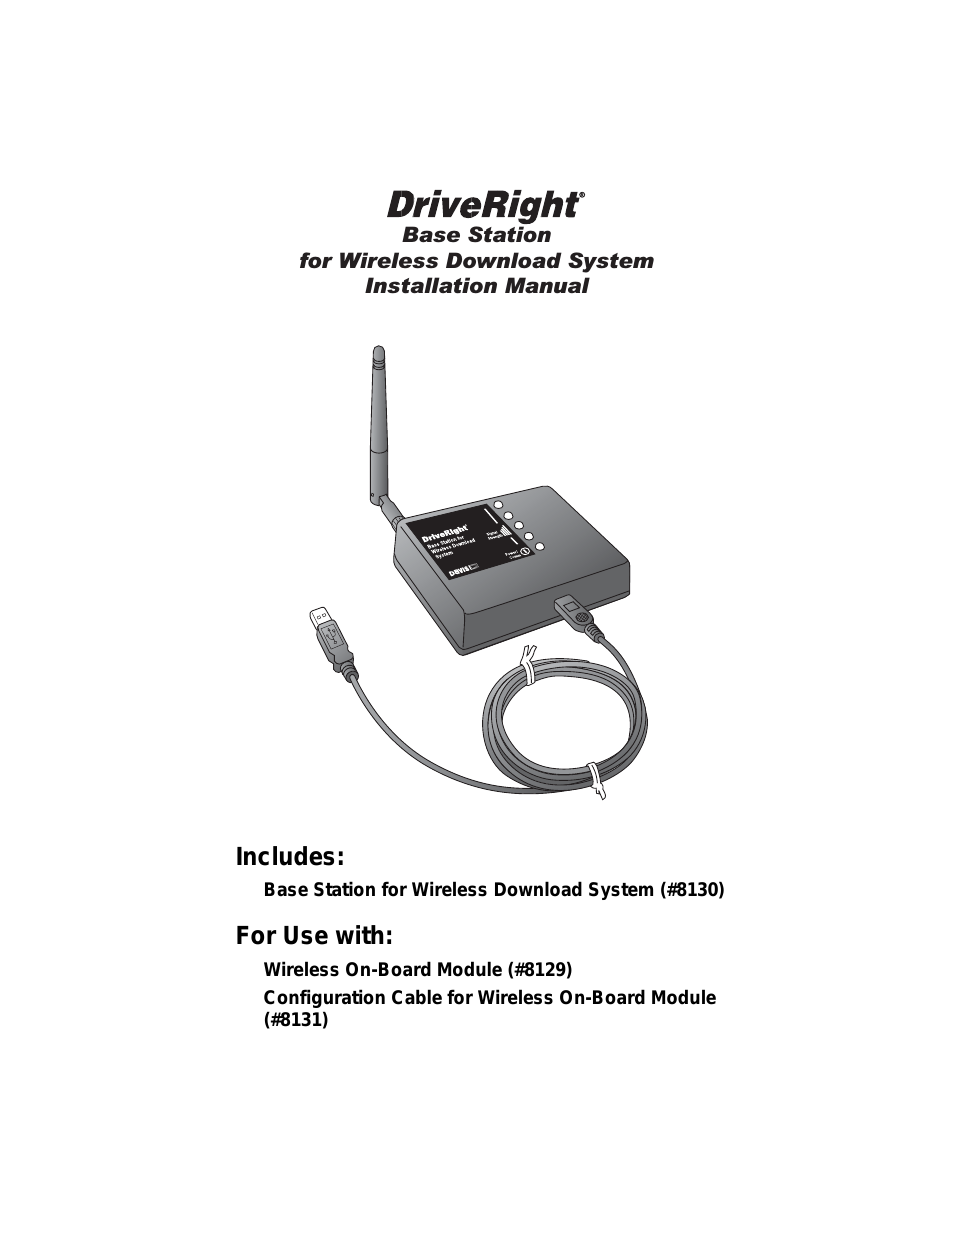 Base Station for Wireless Download Manual (8130)